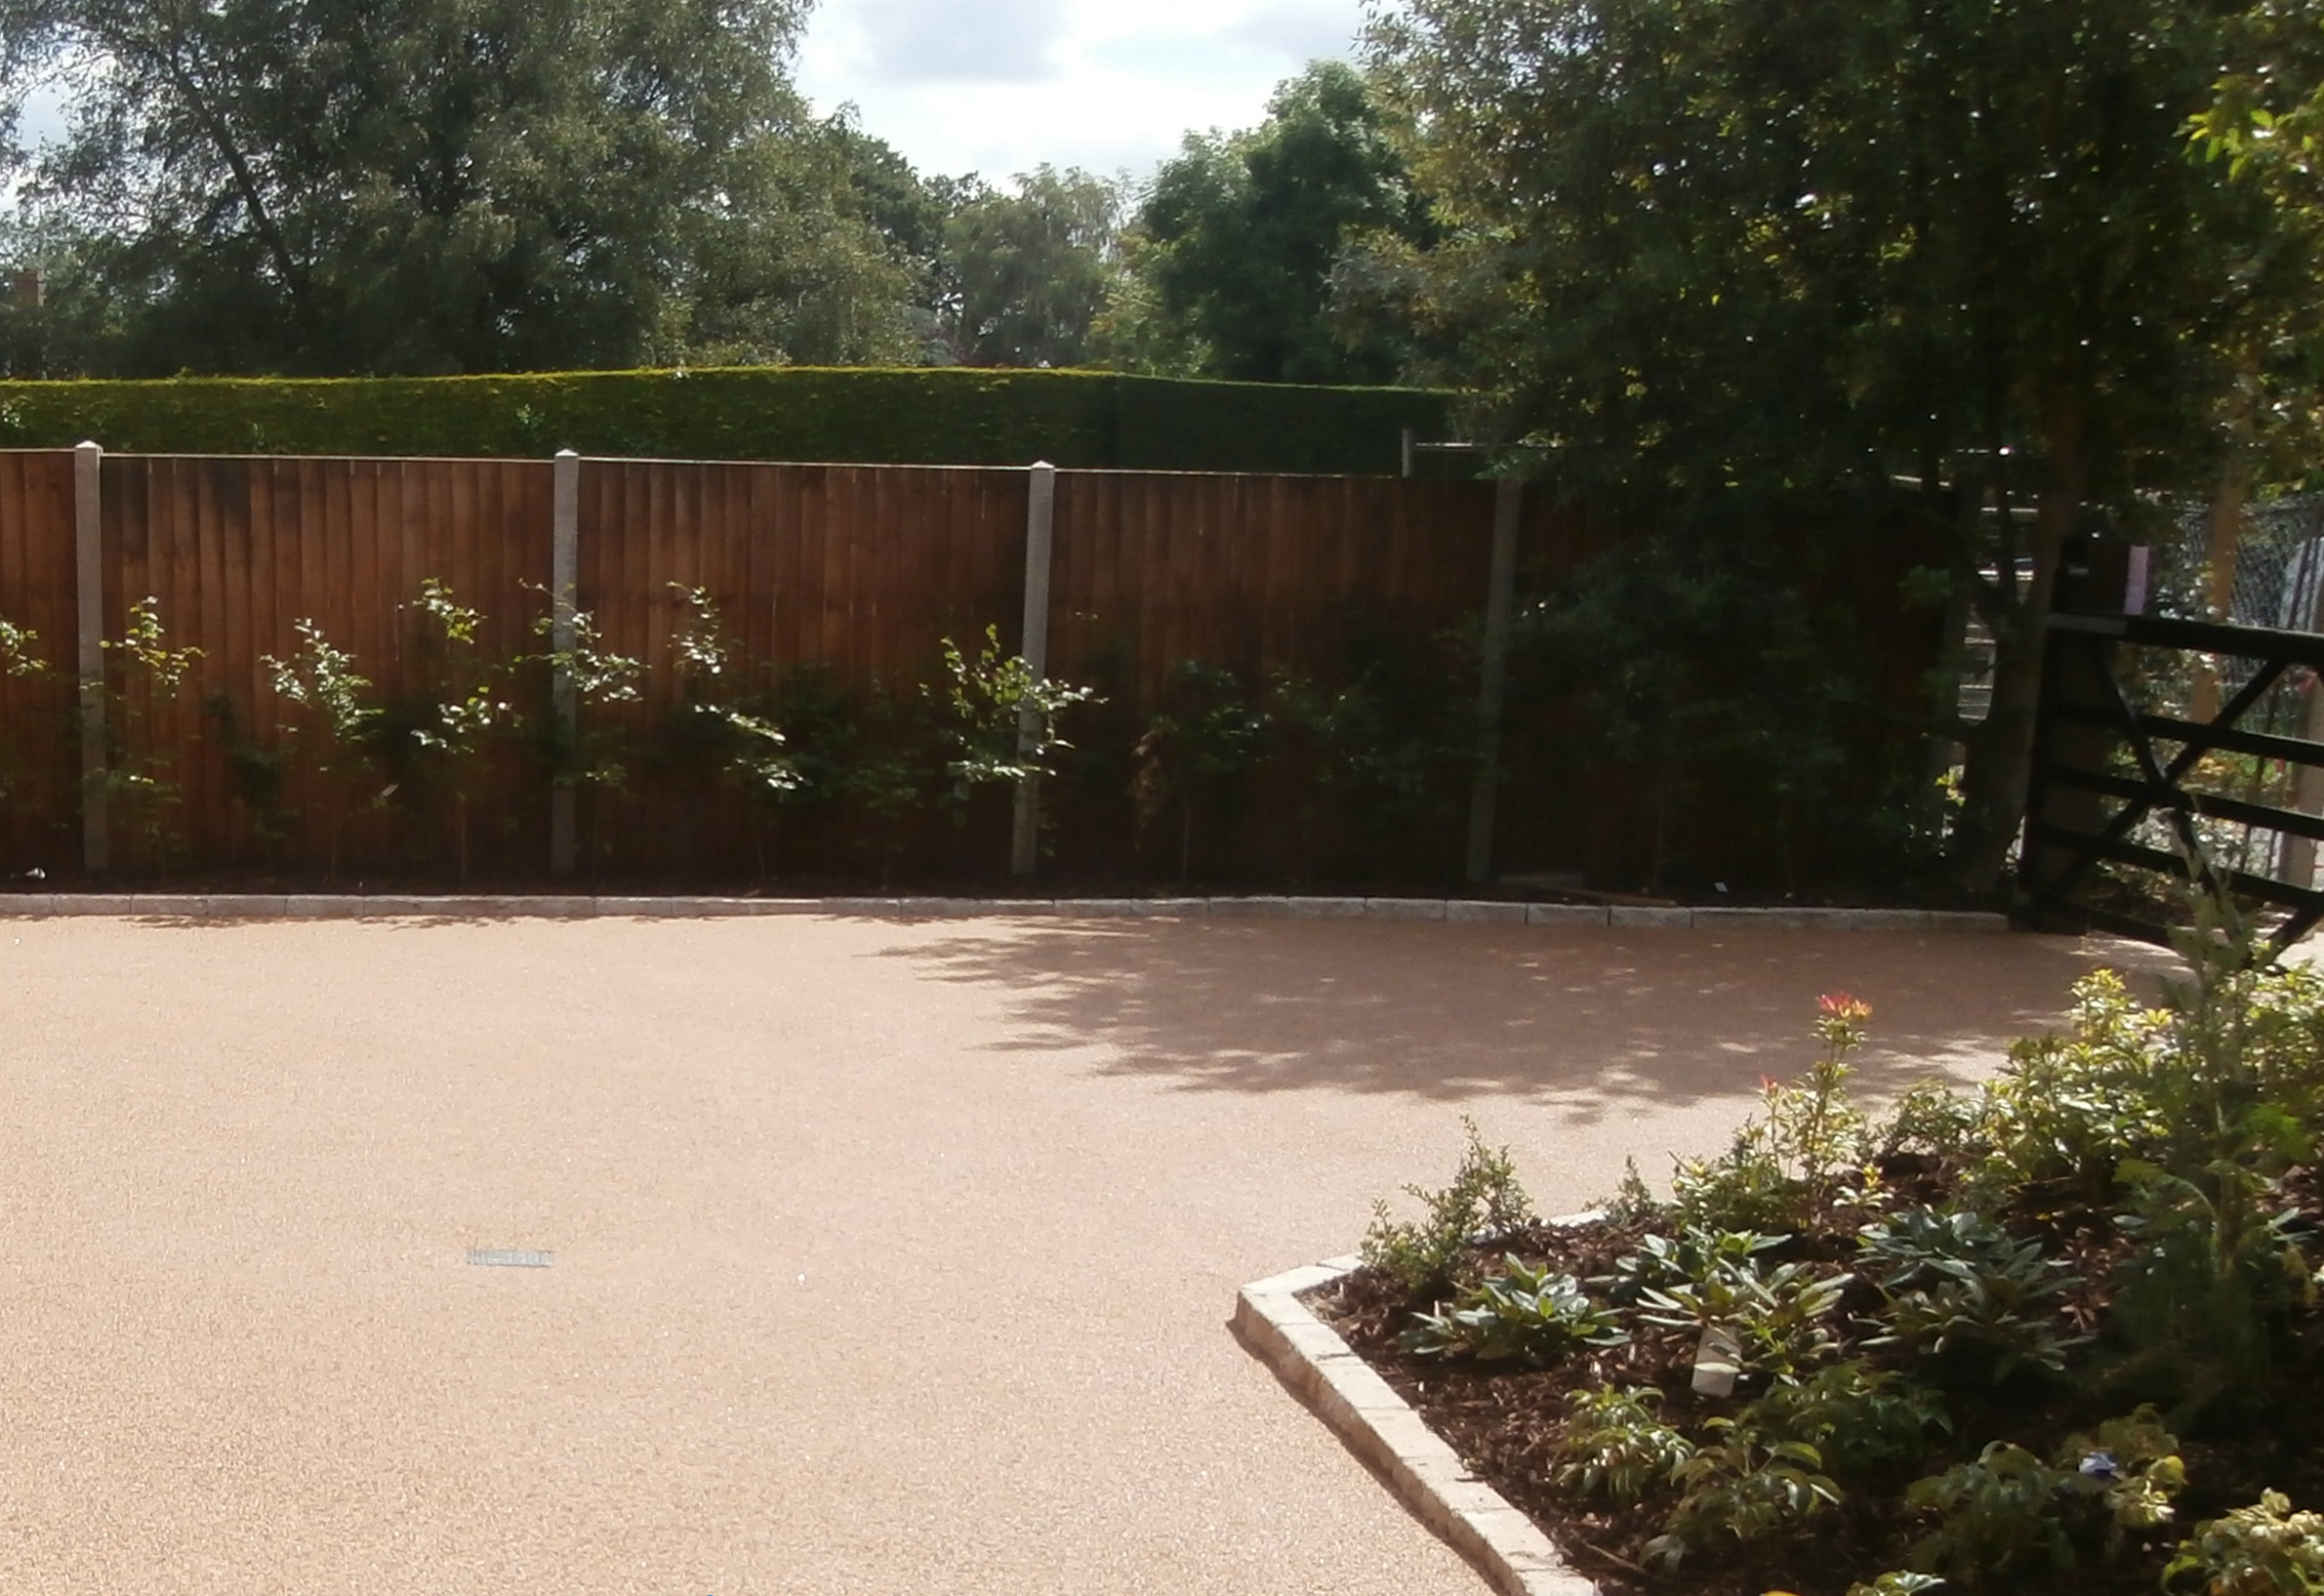 Need Advice or a No-Obligation Quote on Resin Bound driveway?